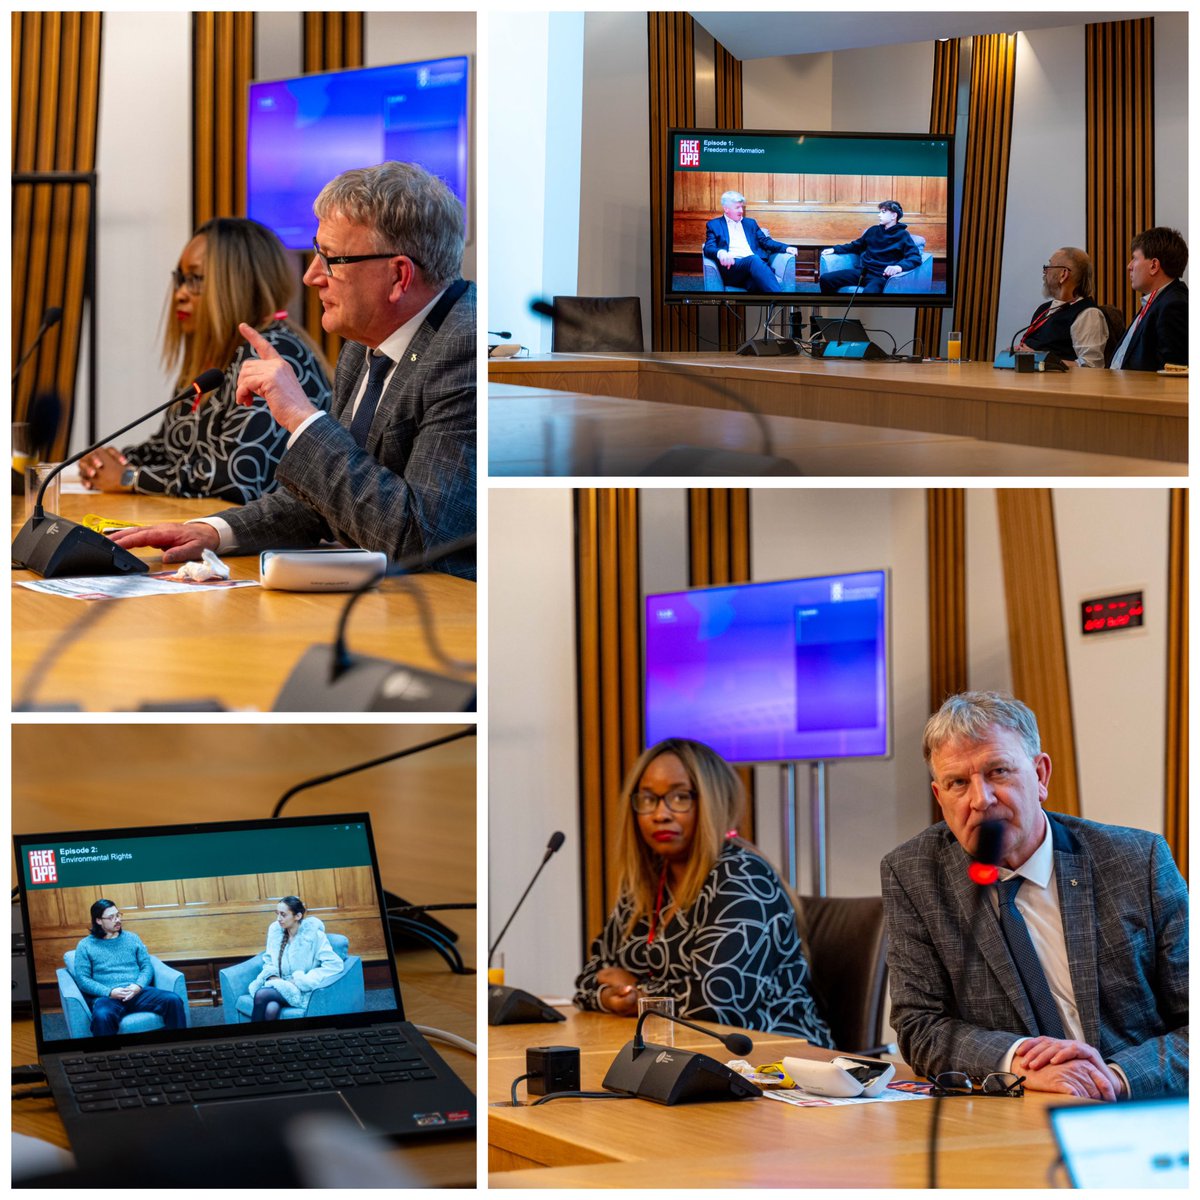 We want to extend our heartfelt thanks to all of you who attended our event this afternoon on #WorldDayofSocialJustice to launch our resources #samerightsforall. We would also like to express our gratitude to @DavidHTorrance for sponsoring this parliamentary reception.